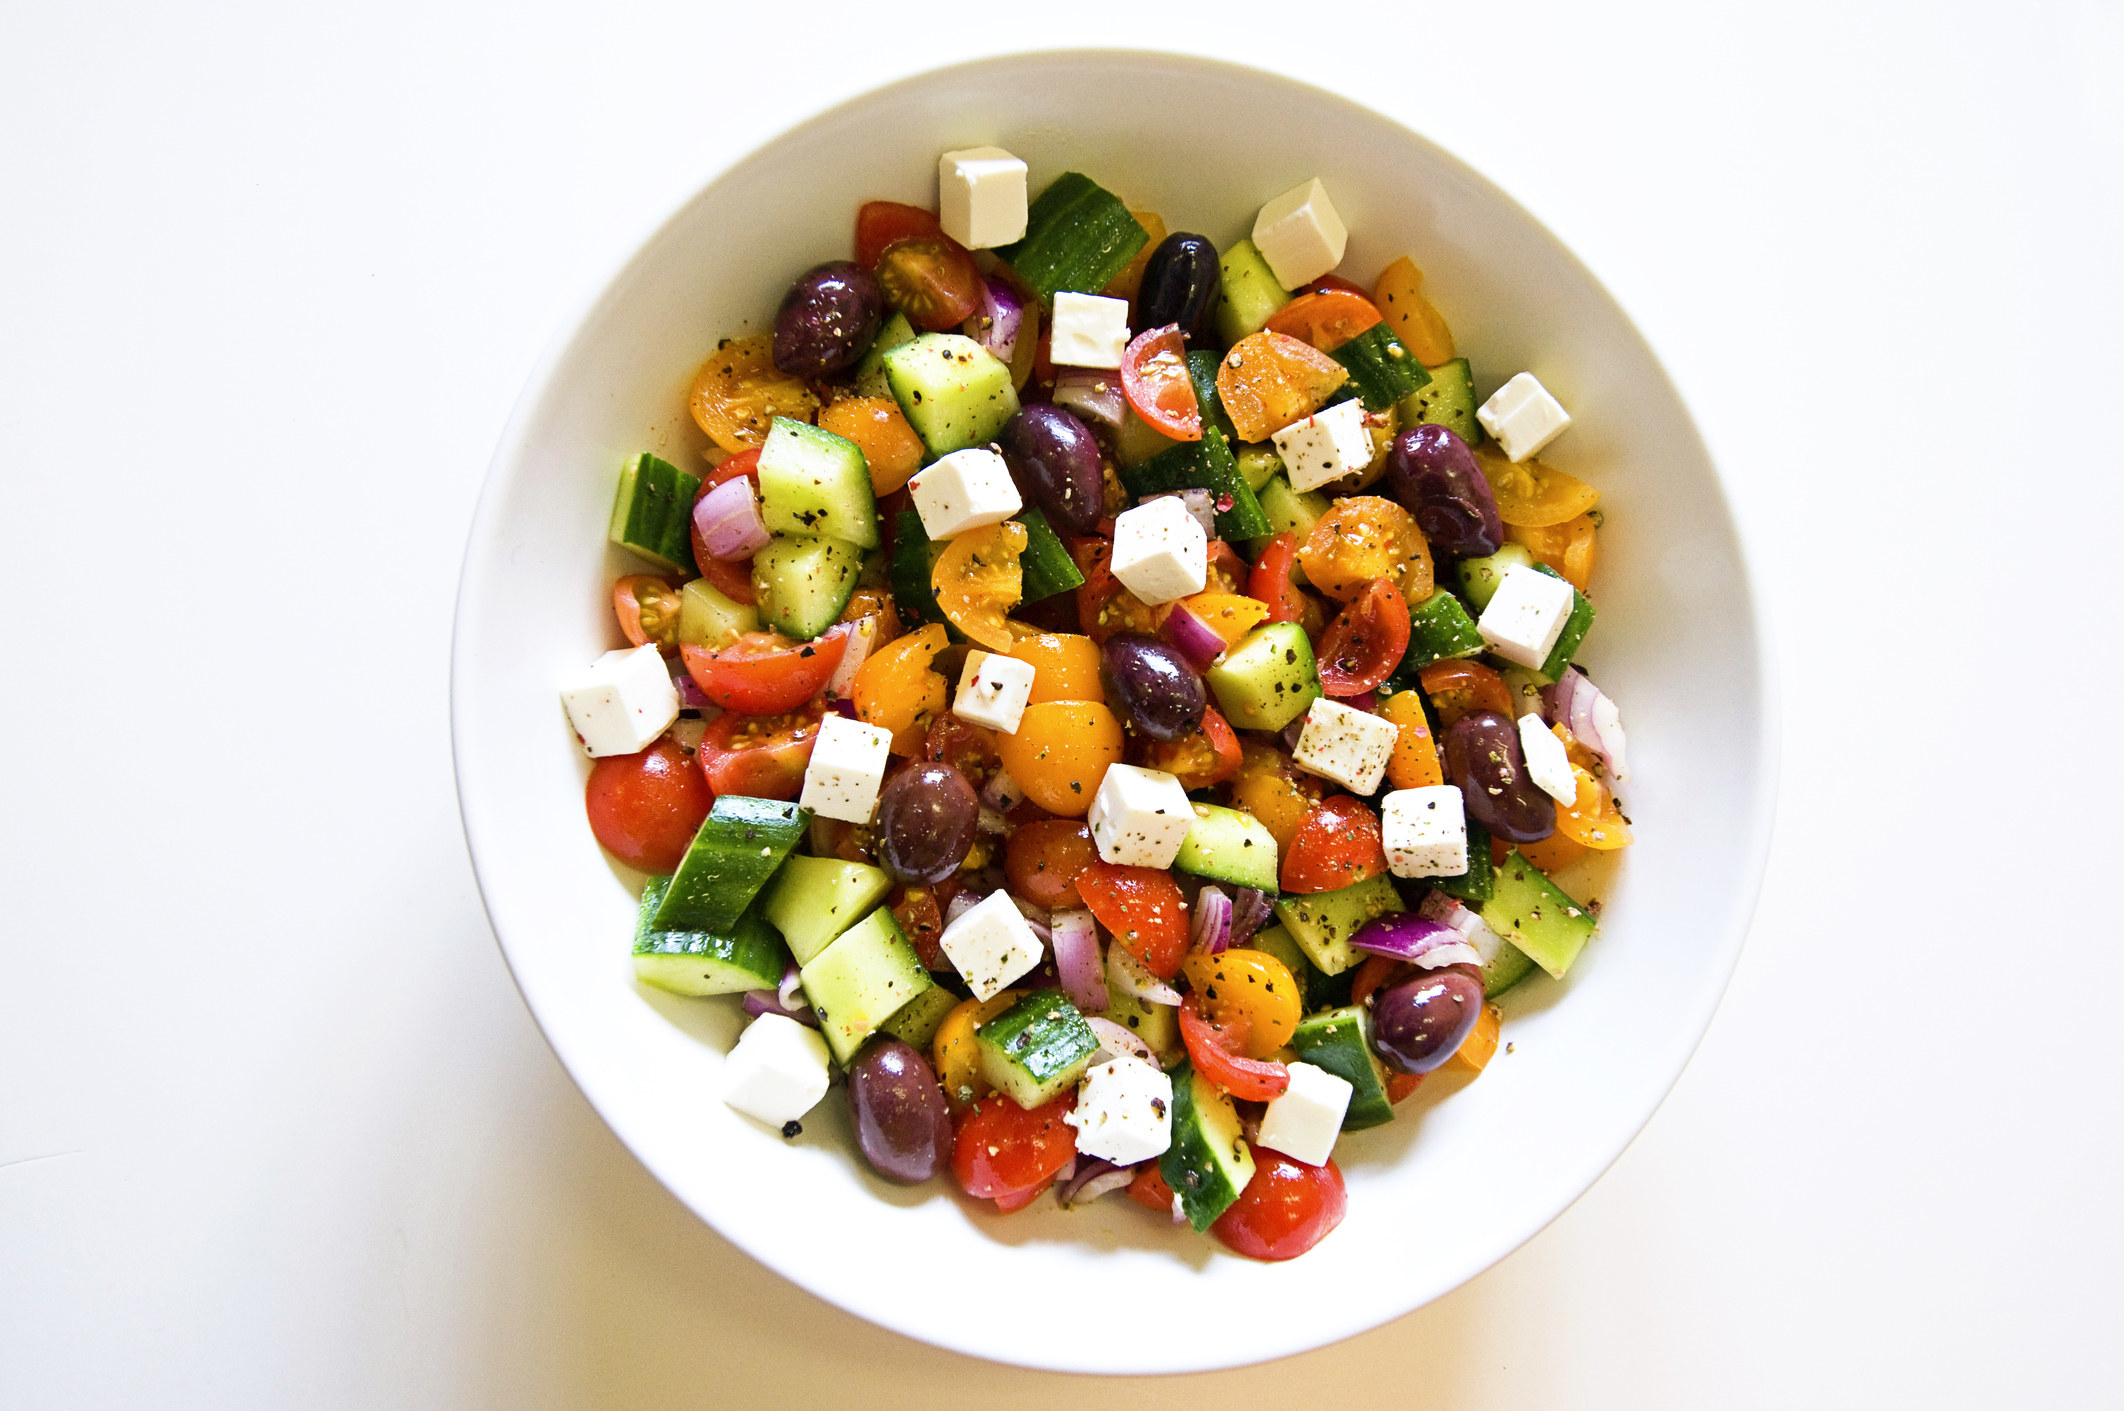 Greek salad, including tomatoes, cucumber, olives, onions and feta cheese.